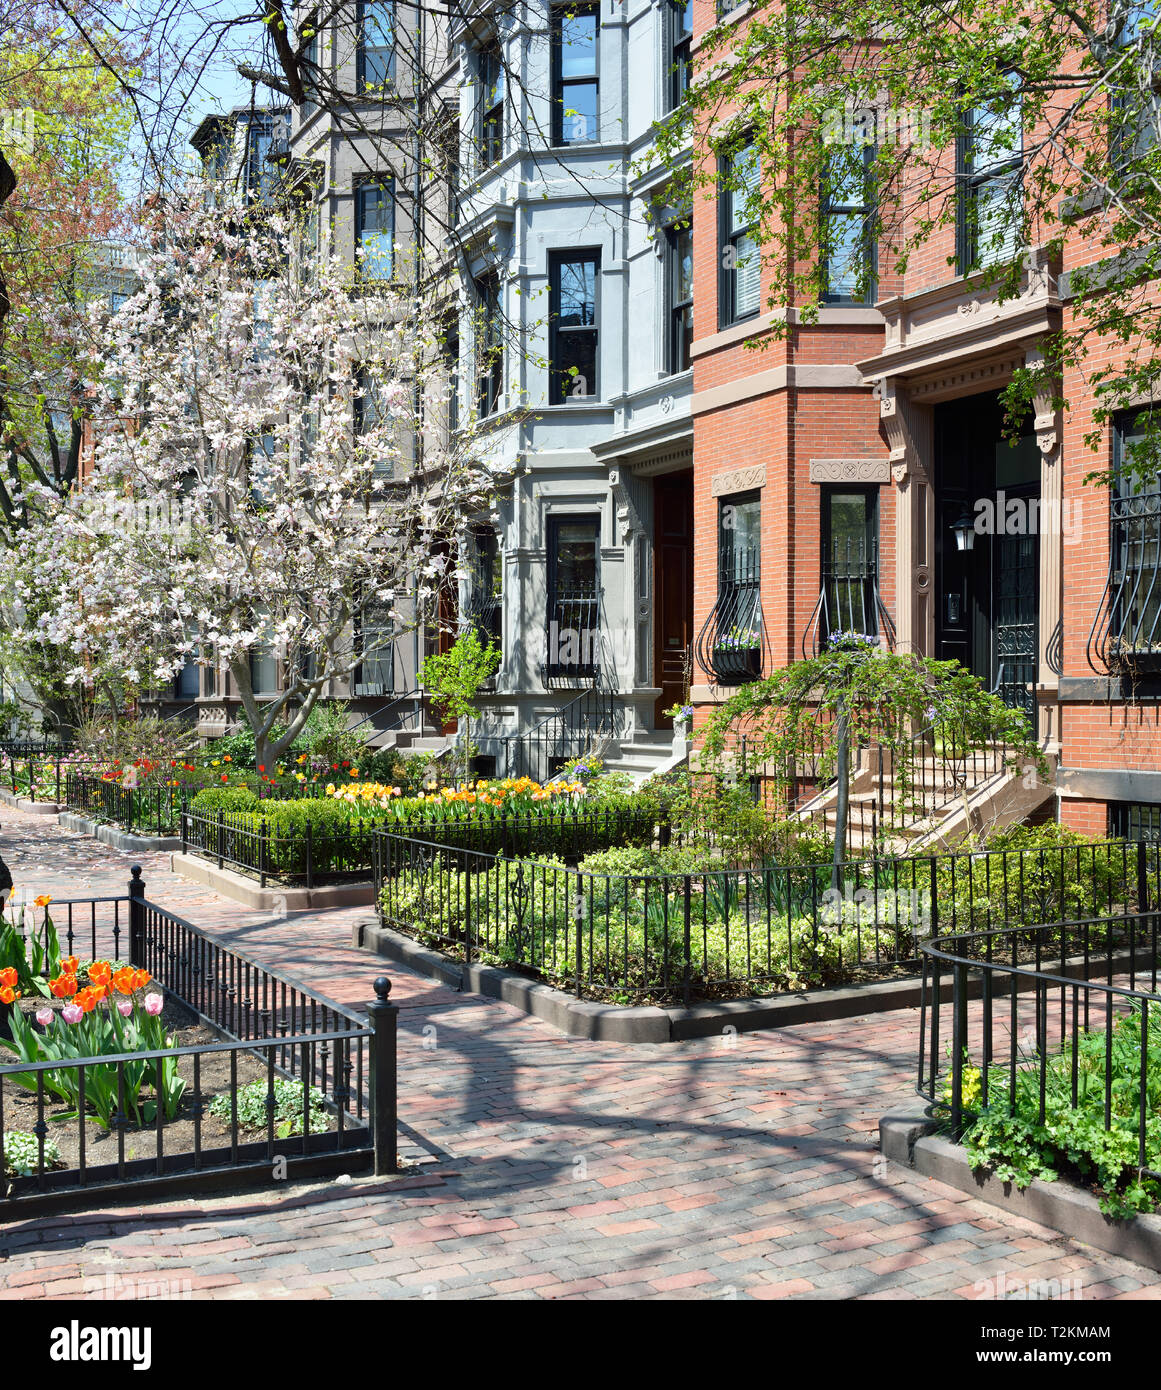 Boston Back Bay in the spring. Victorian architecture, blooming tree flowers, landmarked neighborhood Stock Photo